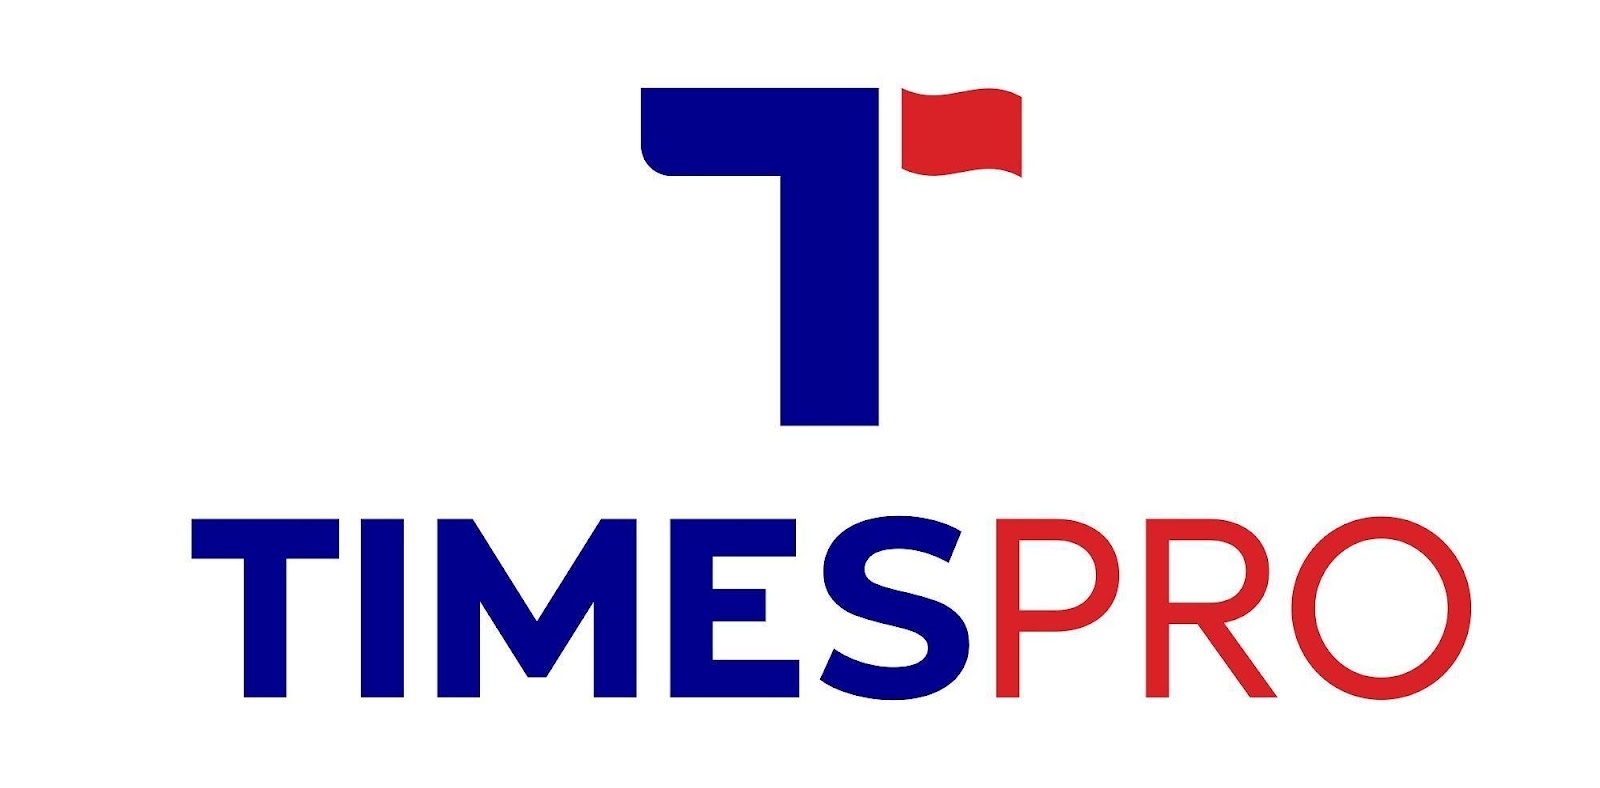 A logo with a flag

Description automatically generated